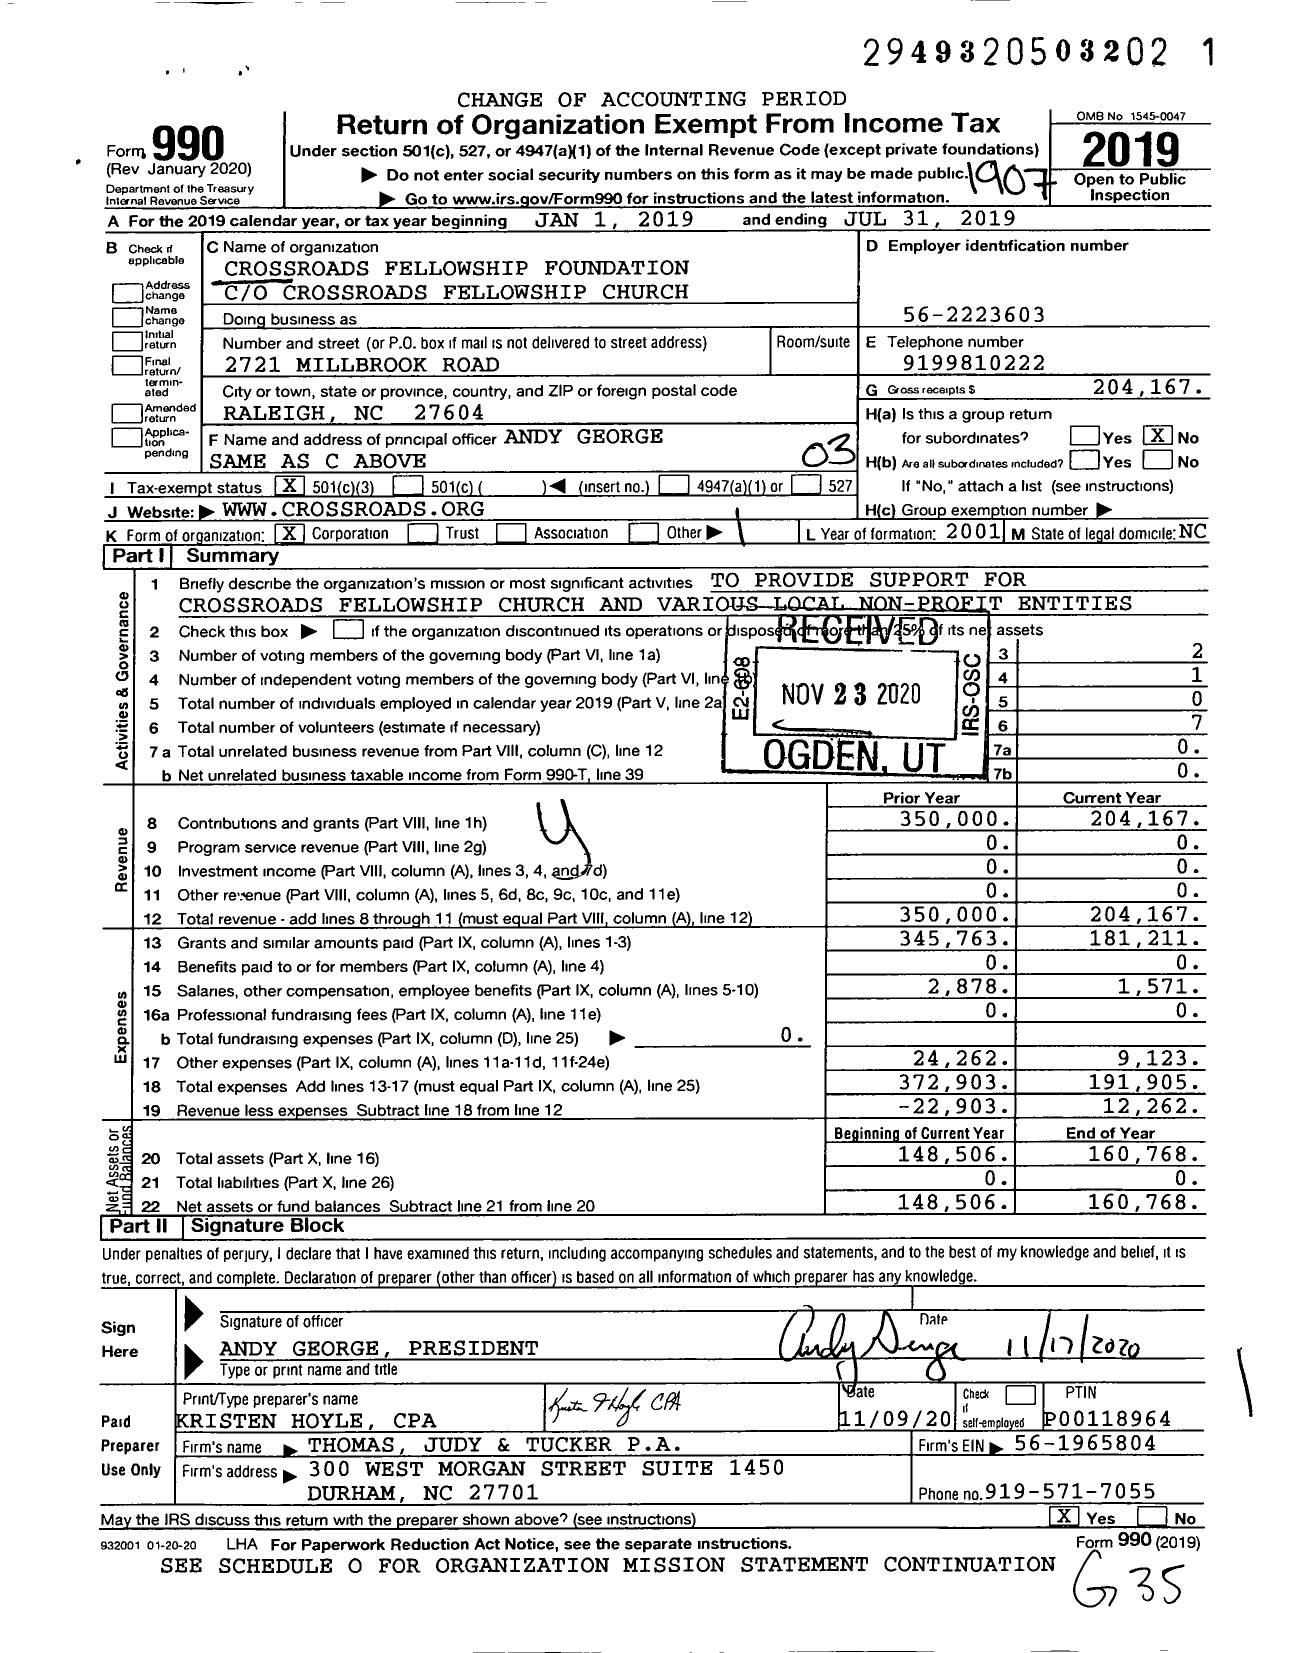 Image of first page of 2018 Form 990 for Crossroads Fellowship Foundation